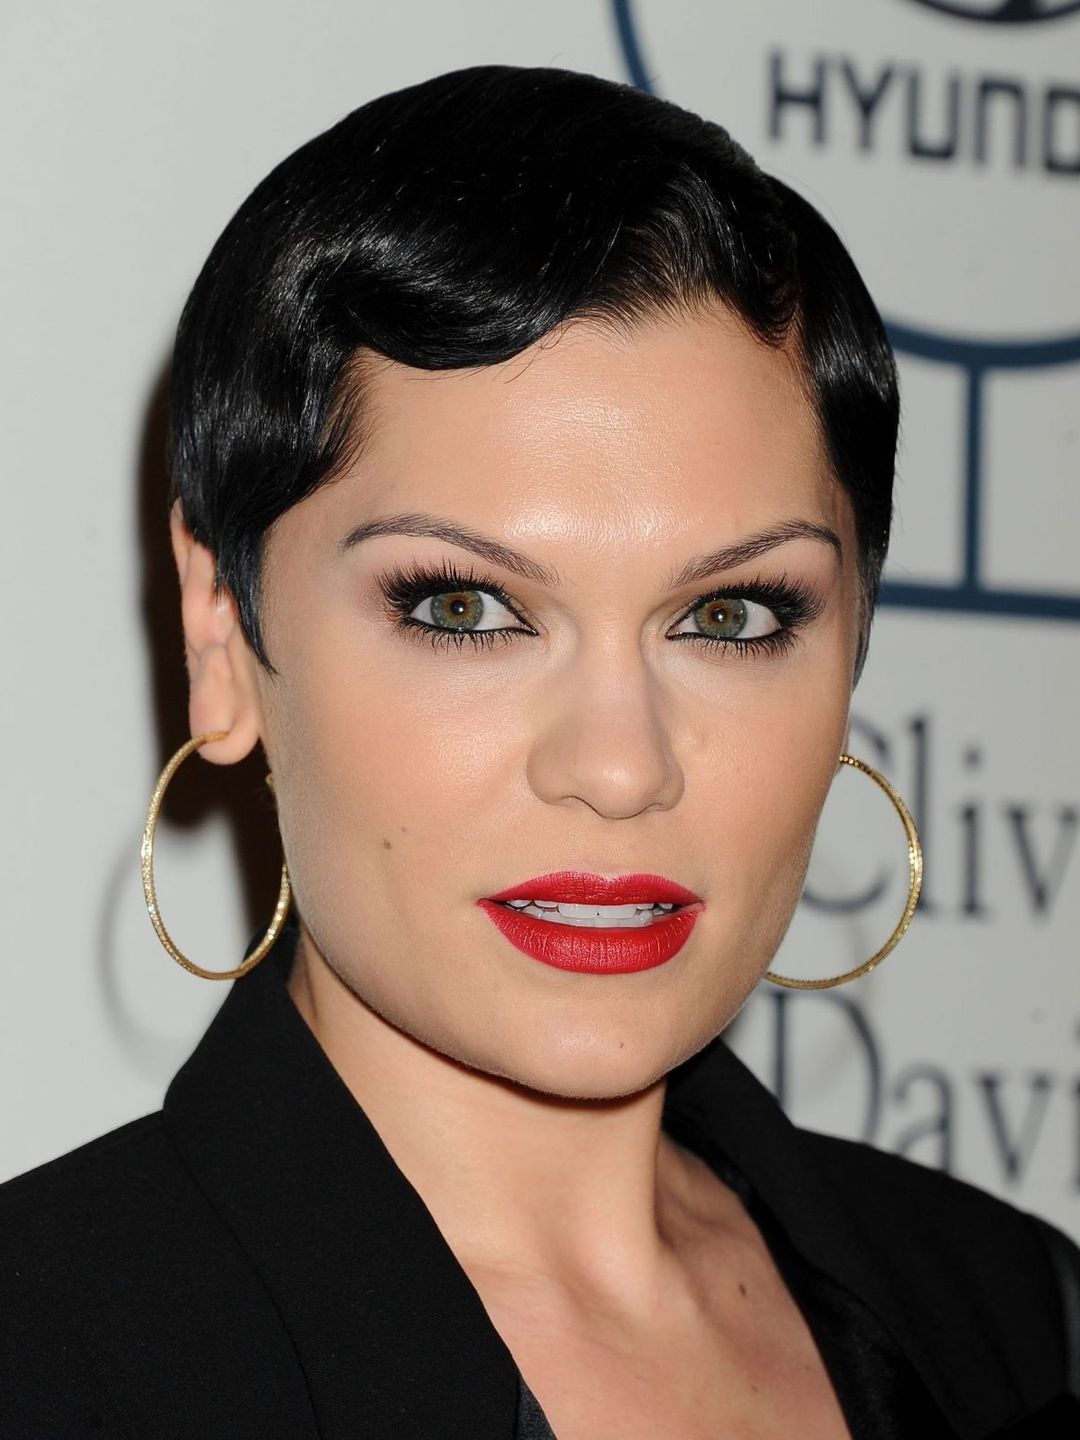 Jessie J how did she became famous